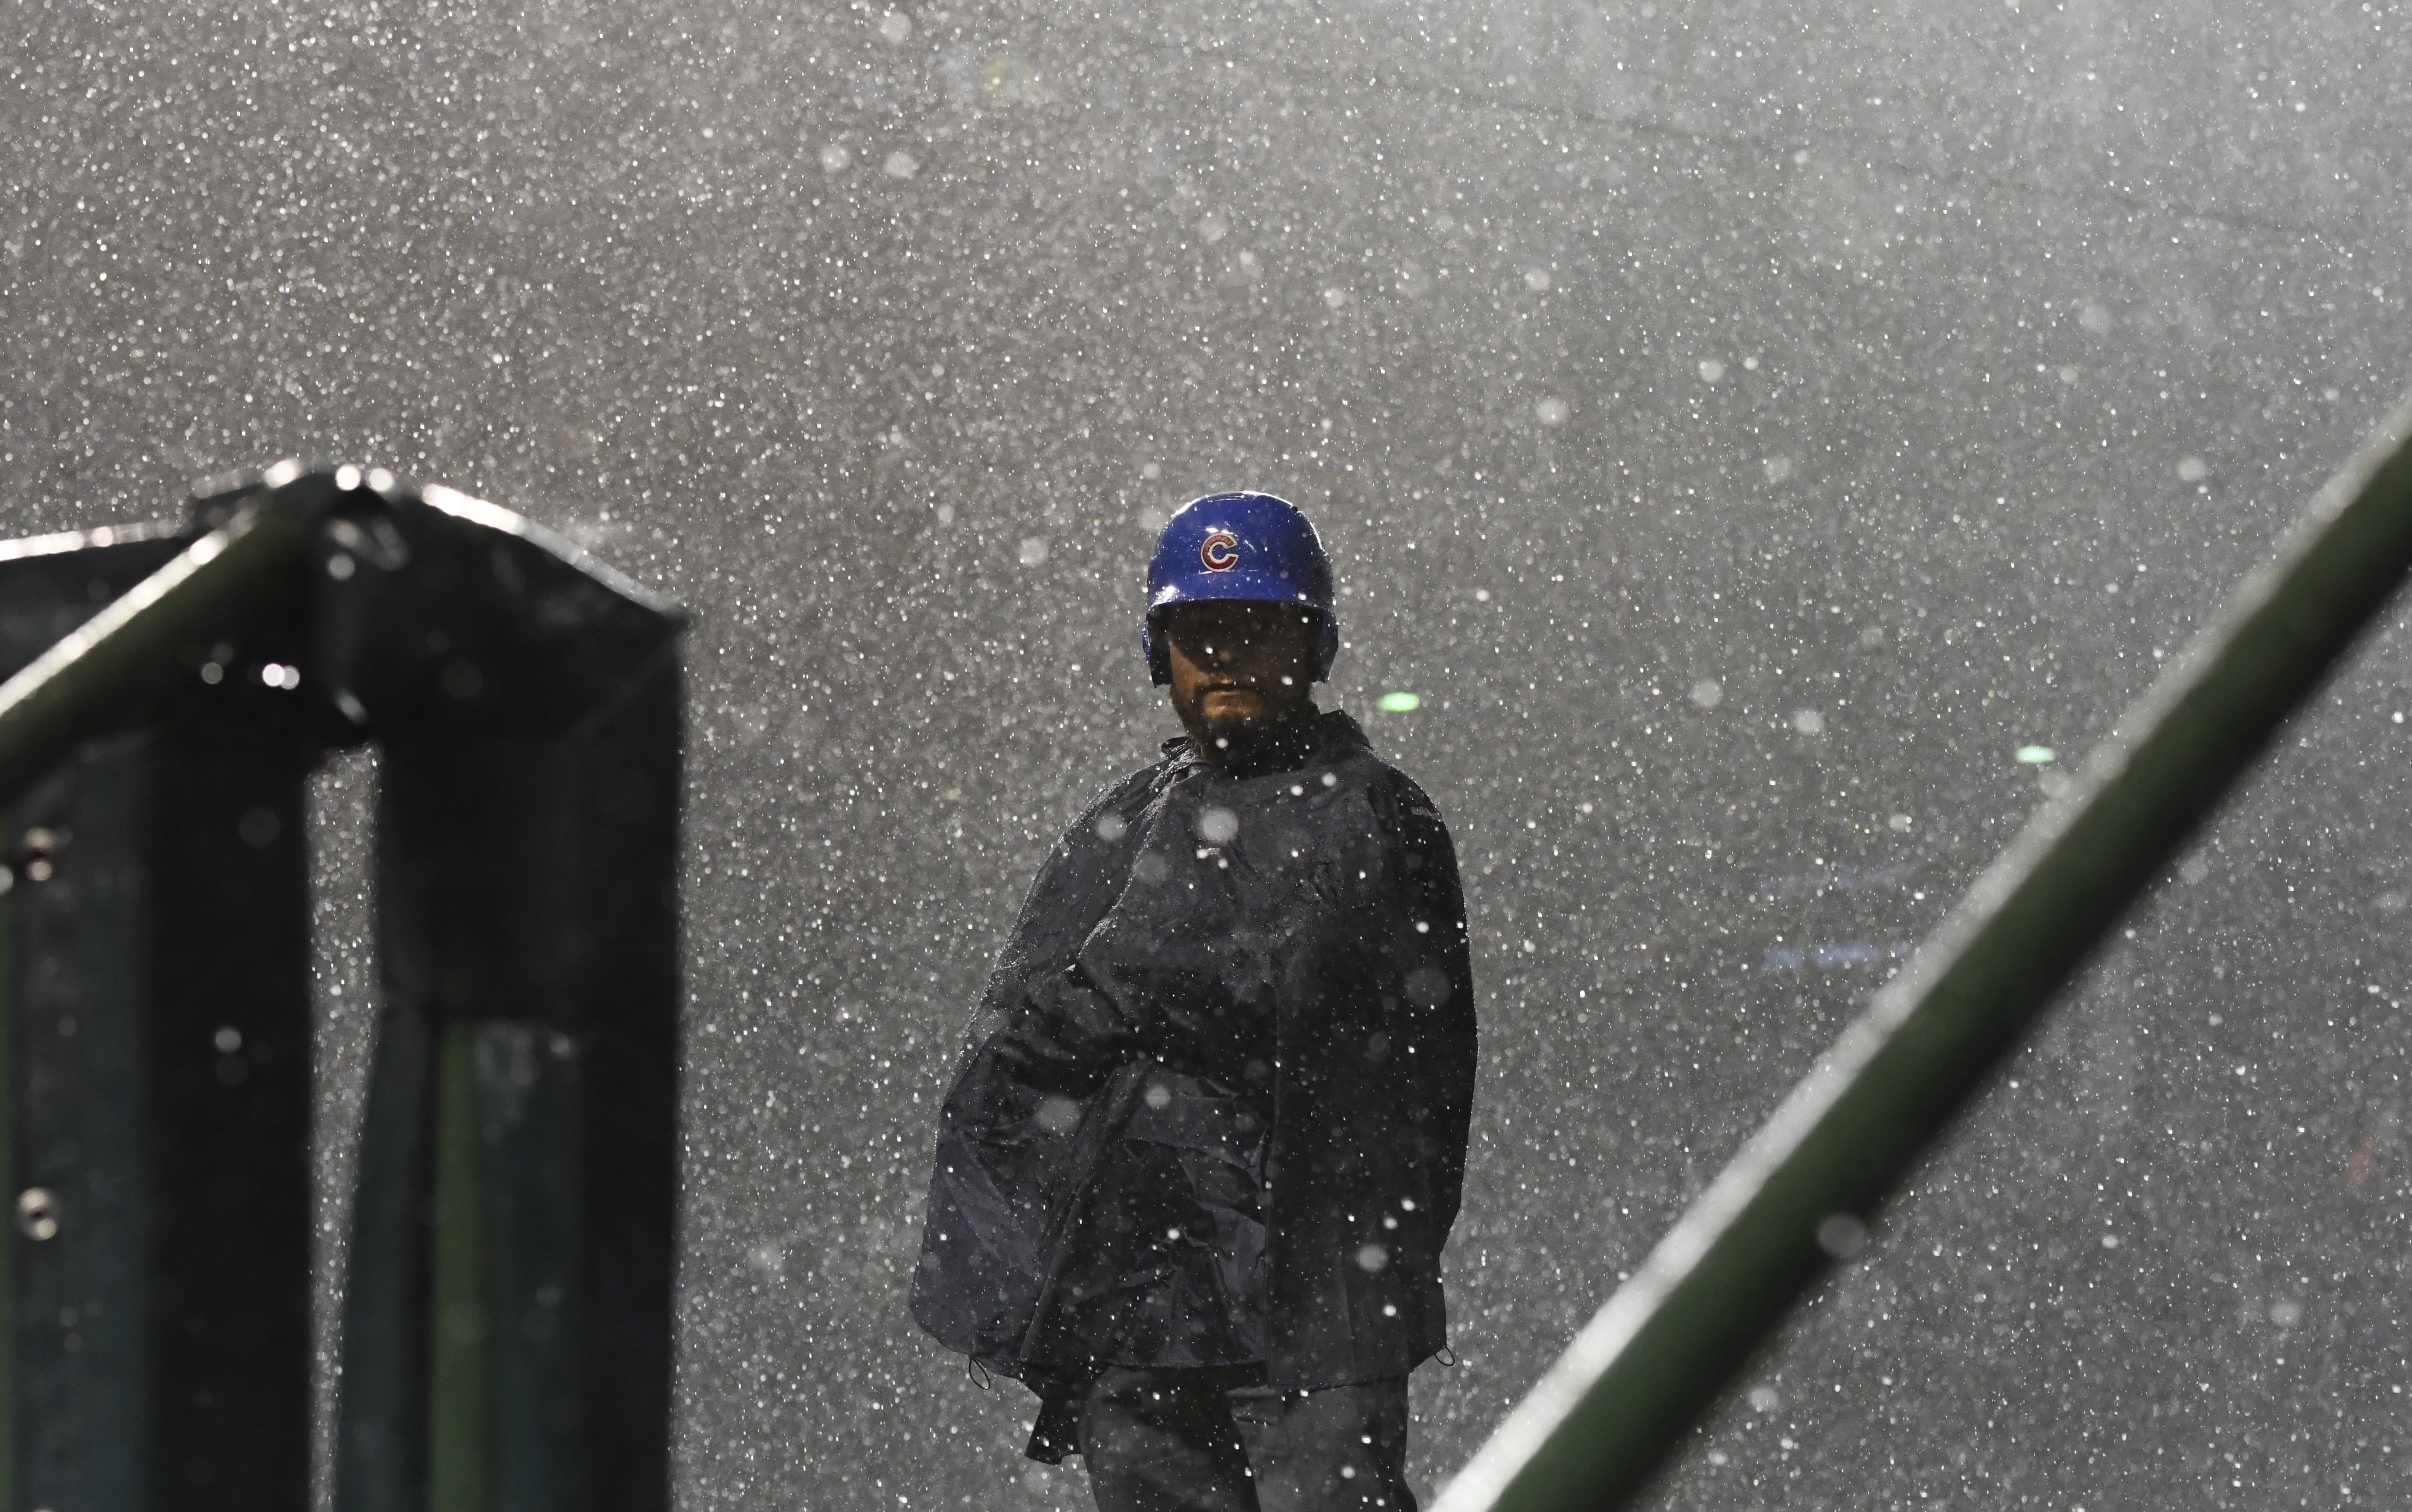 Mets-Cubs game suspended until Wed. at 1-1 in 10th inning